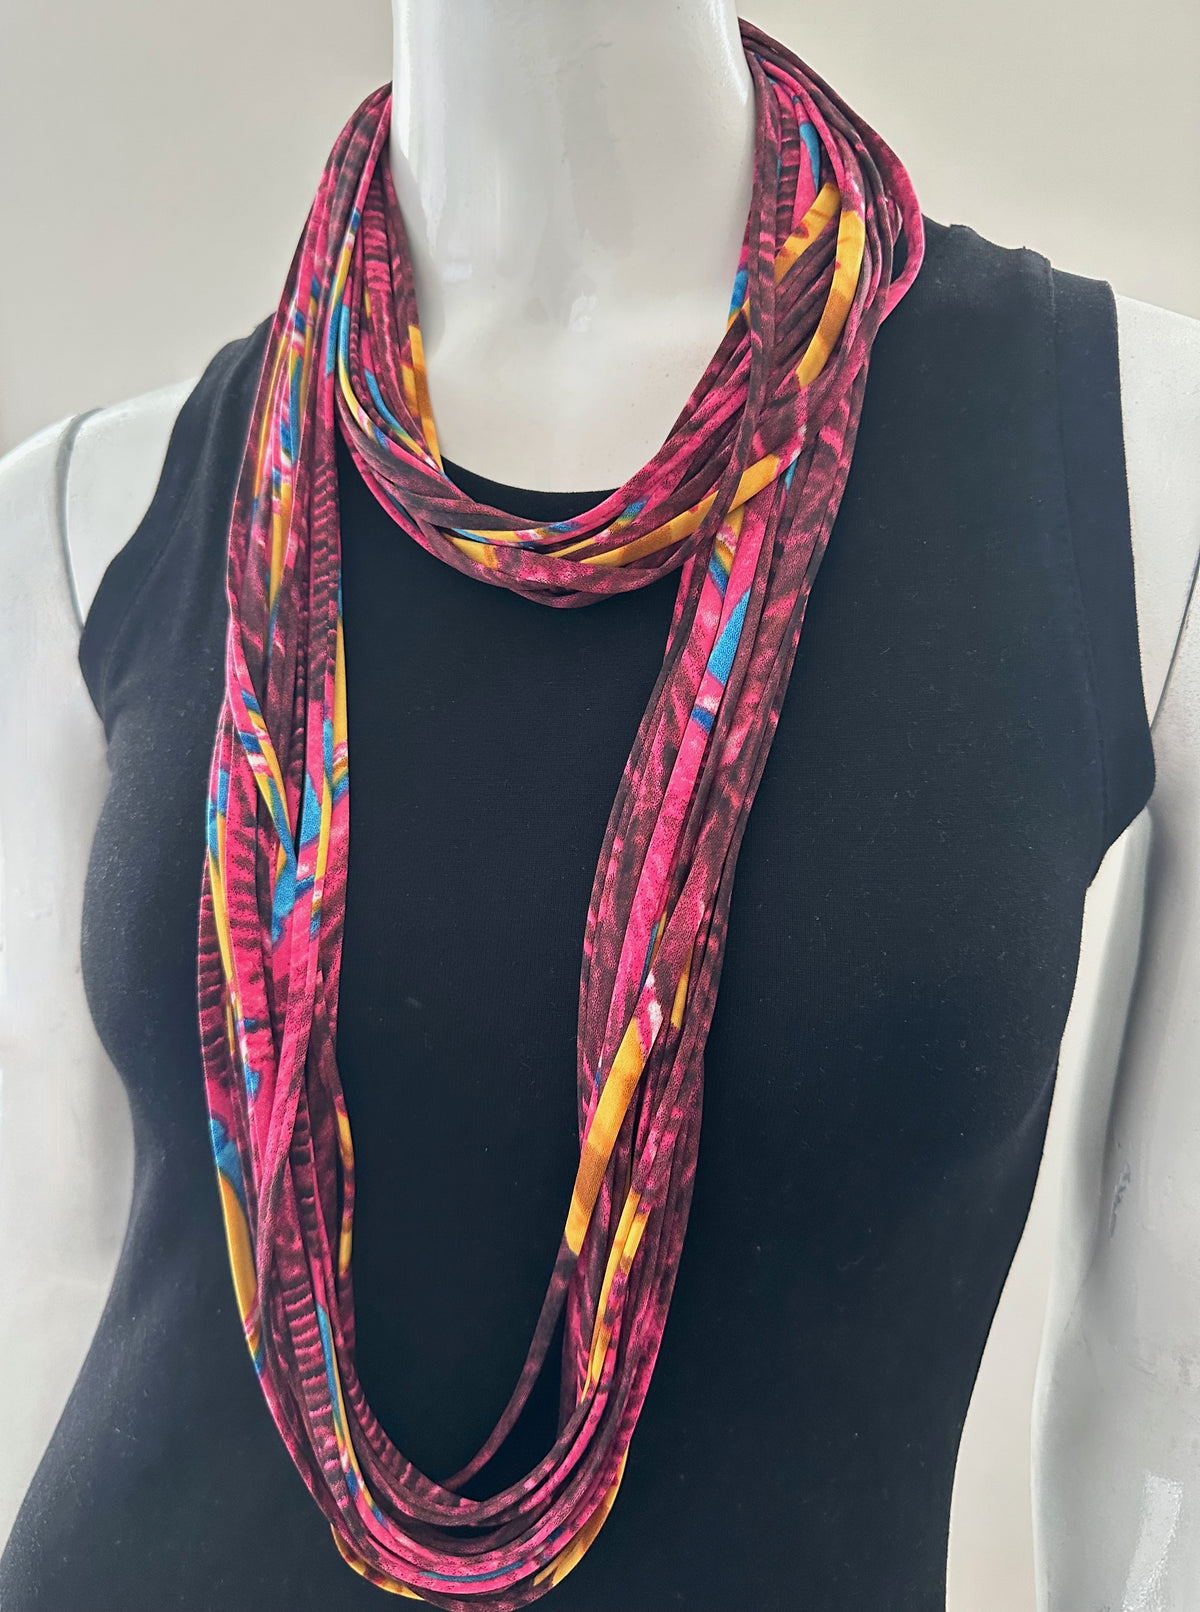 Pink and Yellow Scarf or Necklace &#39; Peacock&#39;